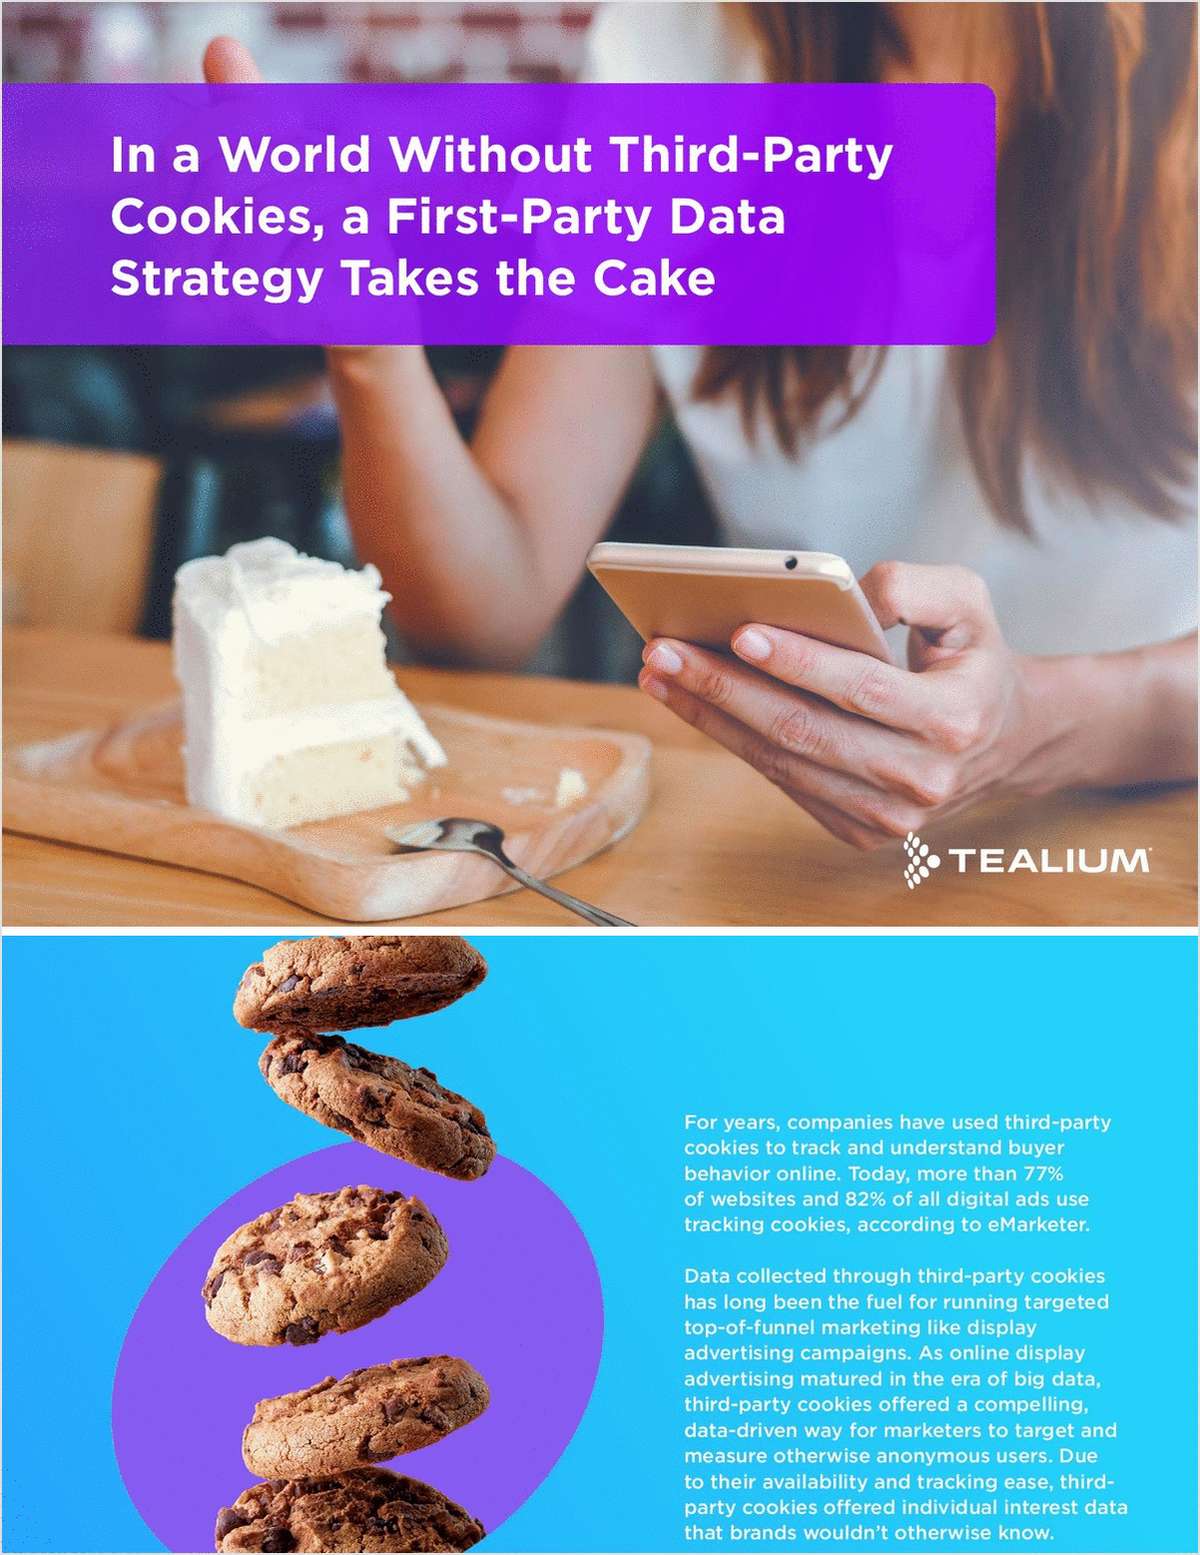 Read: A First-Party Data Strategy Takes the Cake